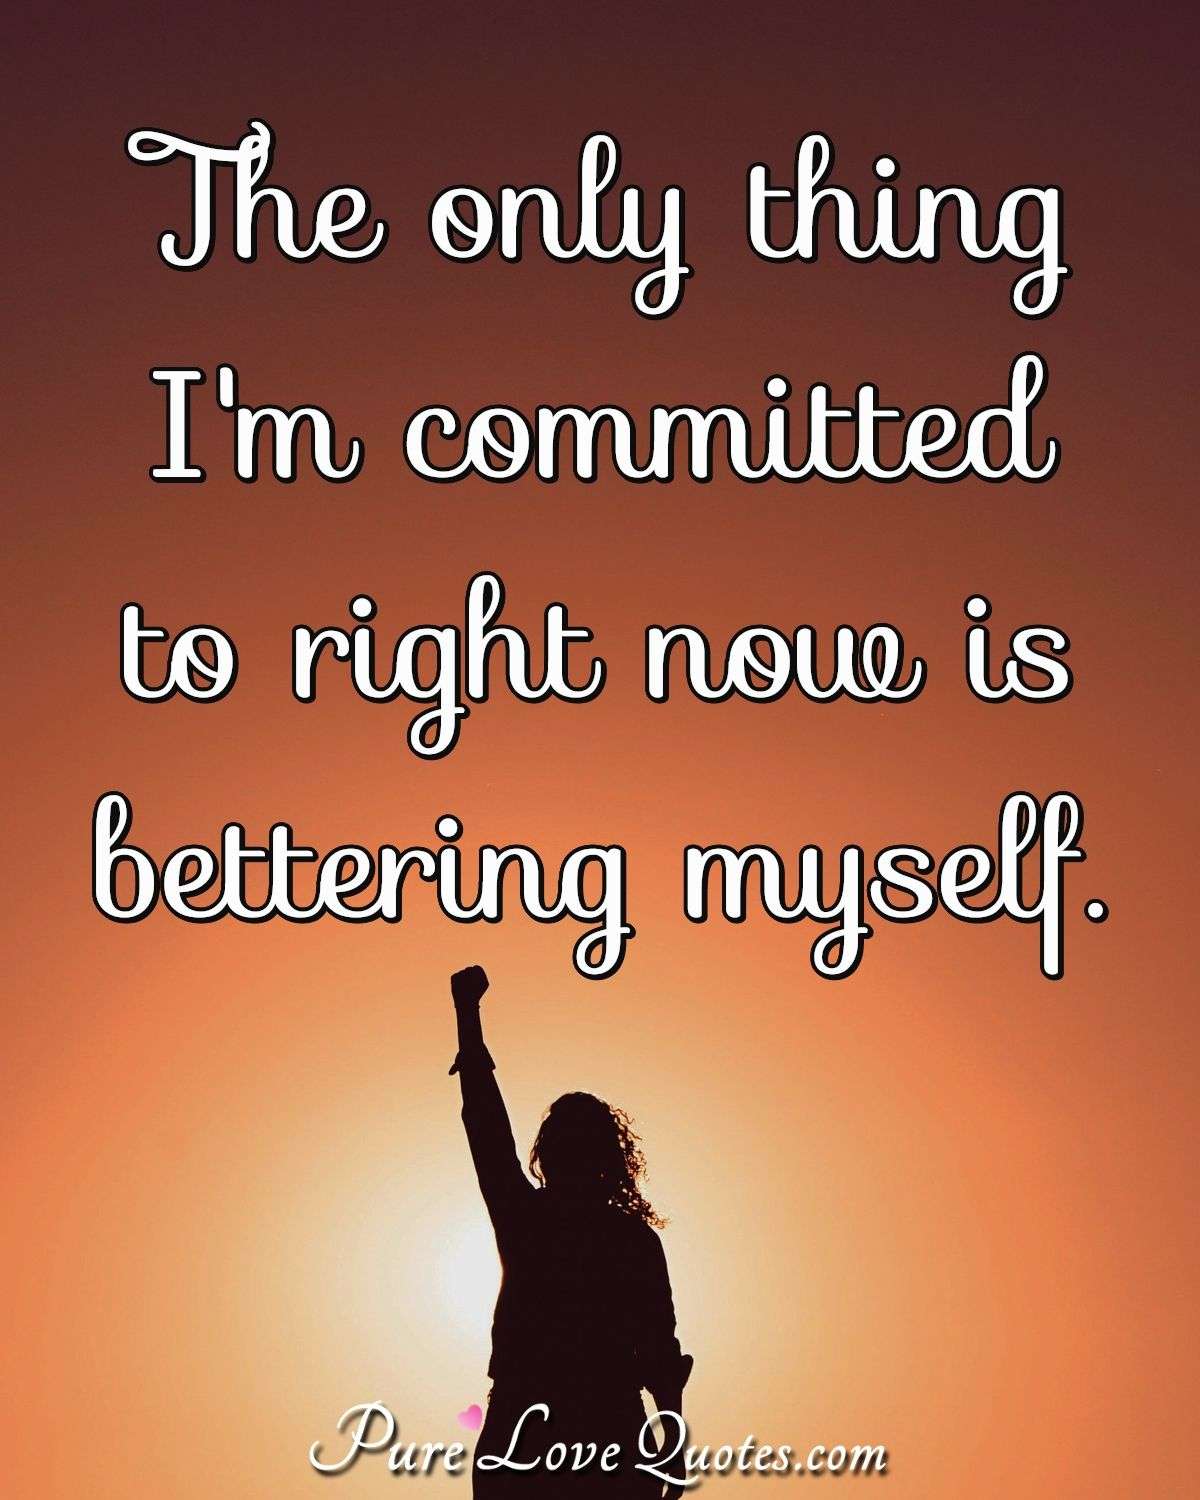 The only thing I'm committed to right now is bettering myself. - Anonymous